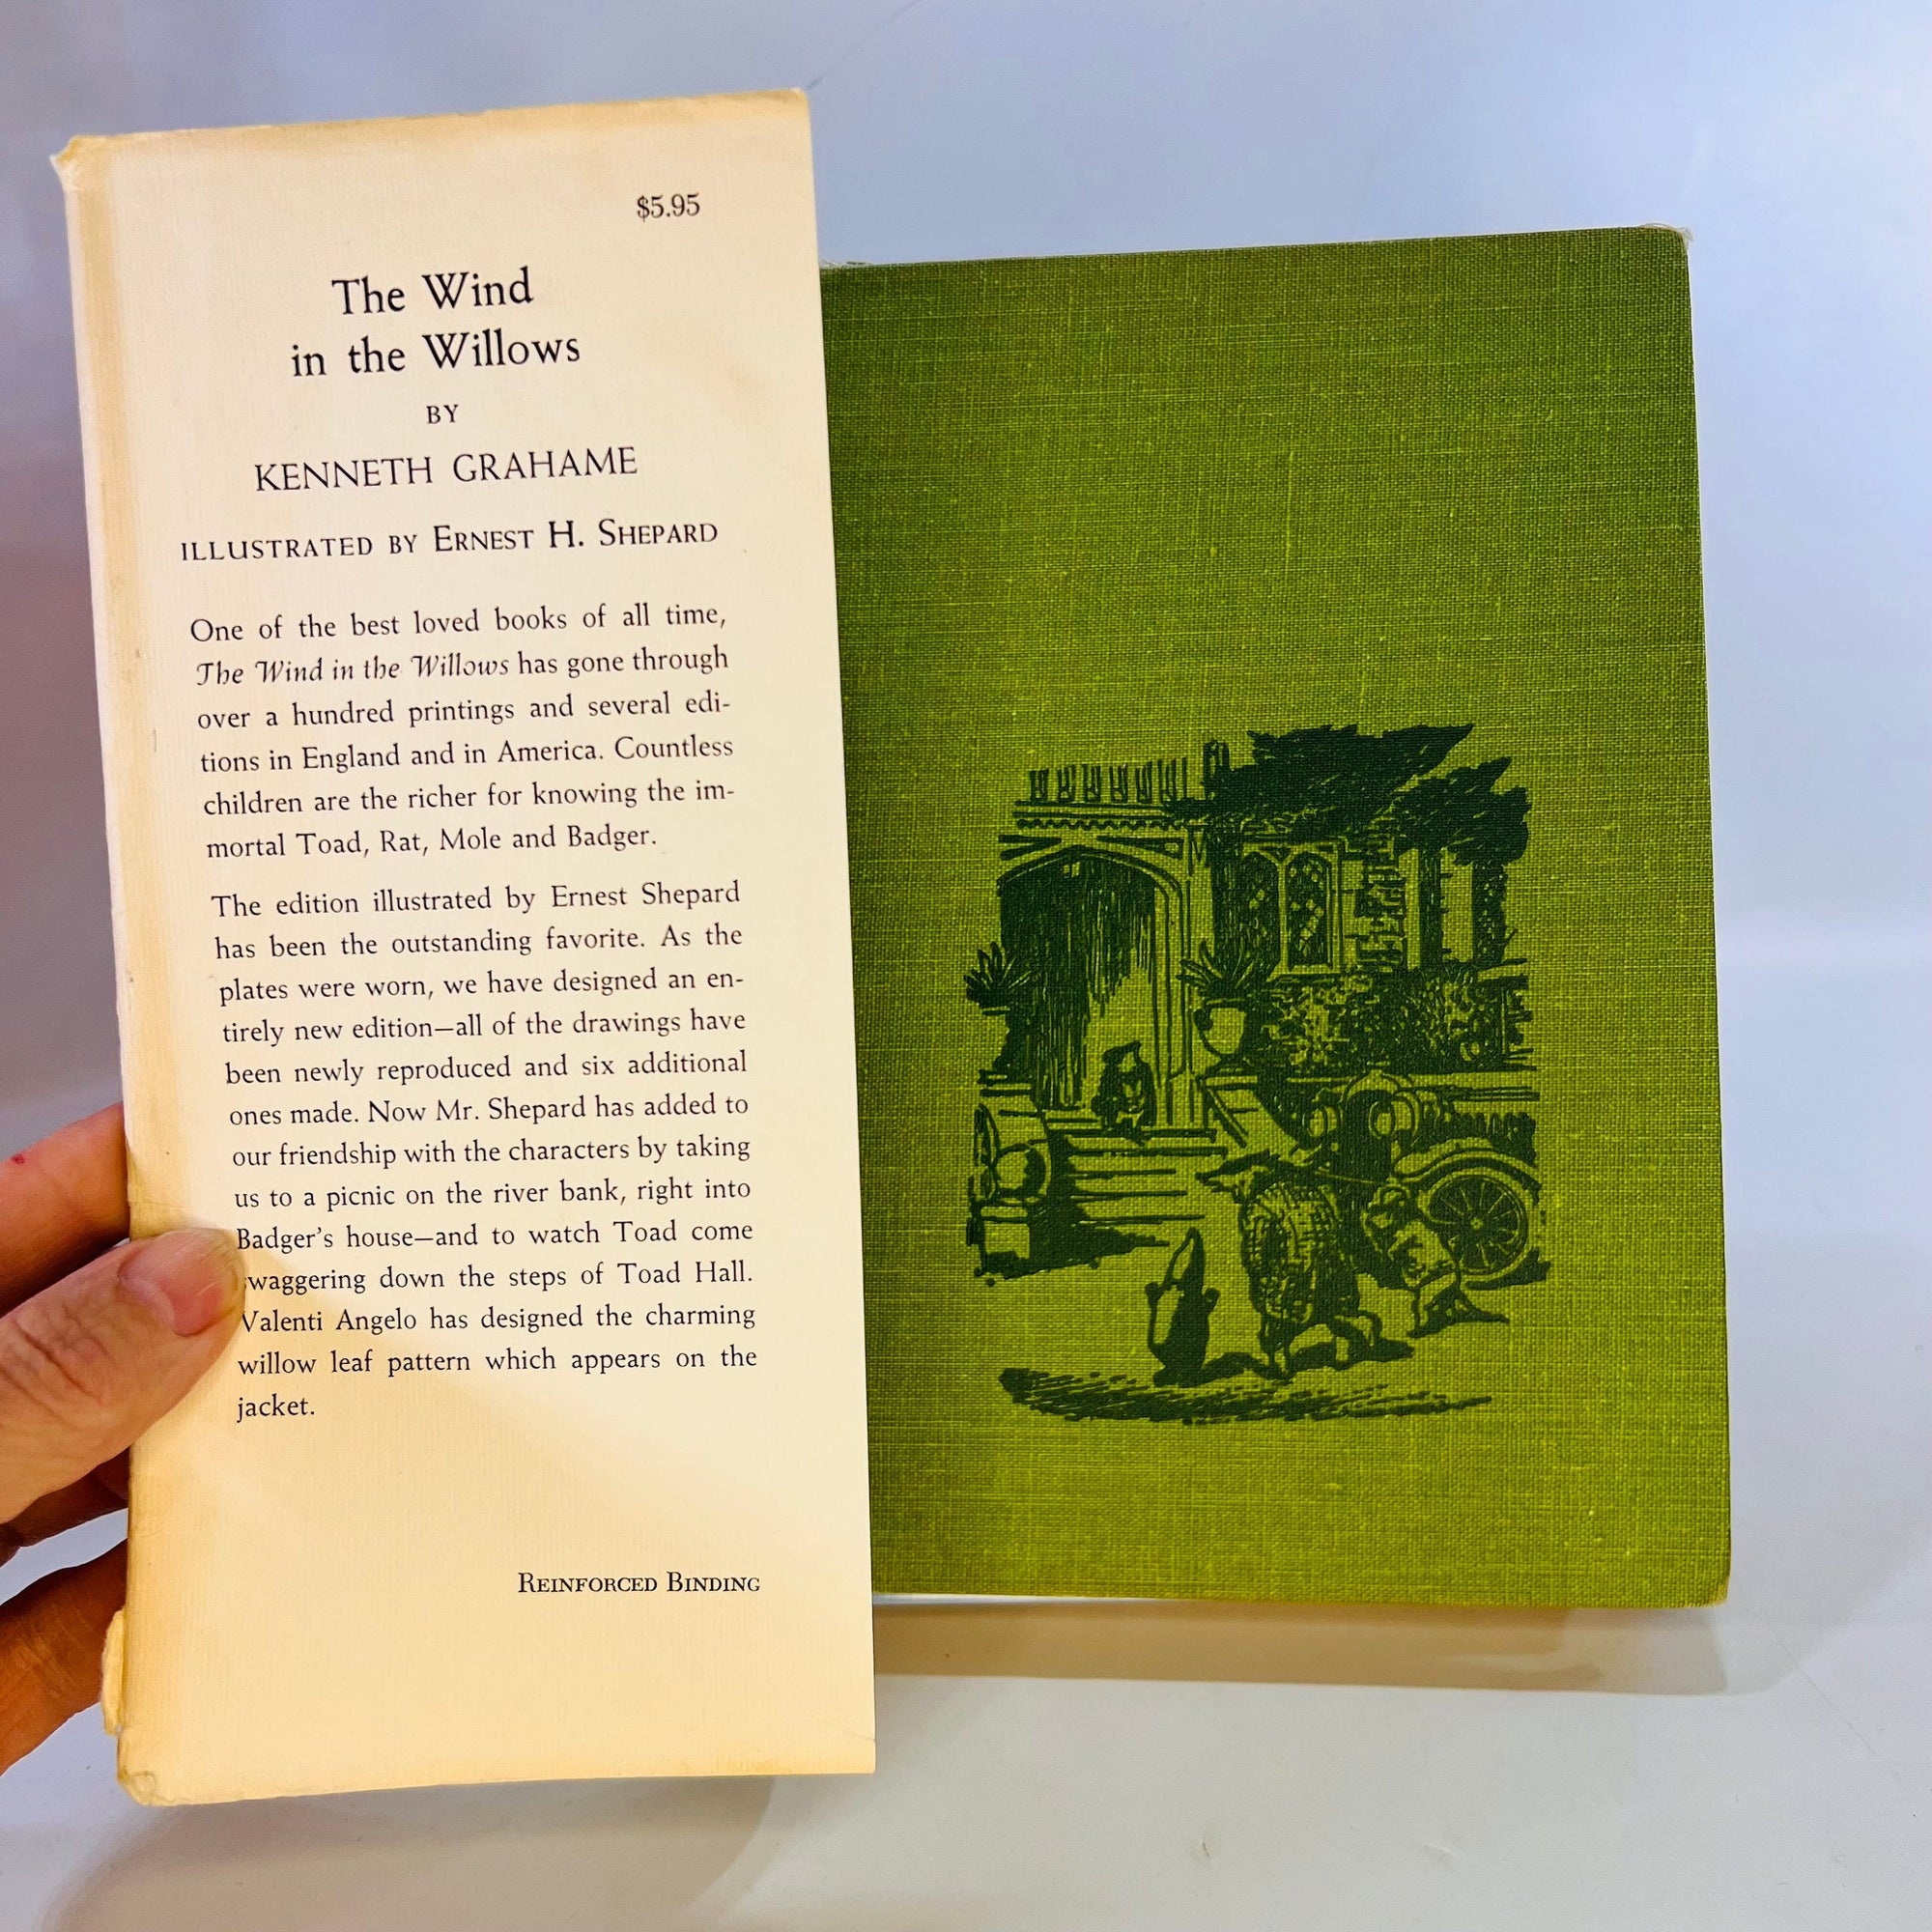 The Wind in the Willows by Kenneth Grahame 1961 Charles Scribner's Sons New YorkVintage Book